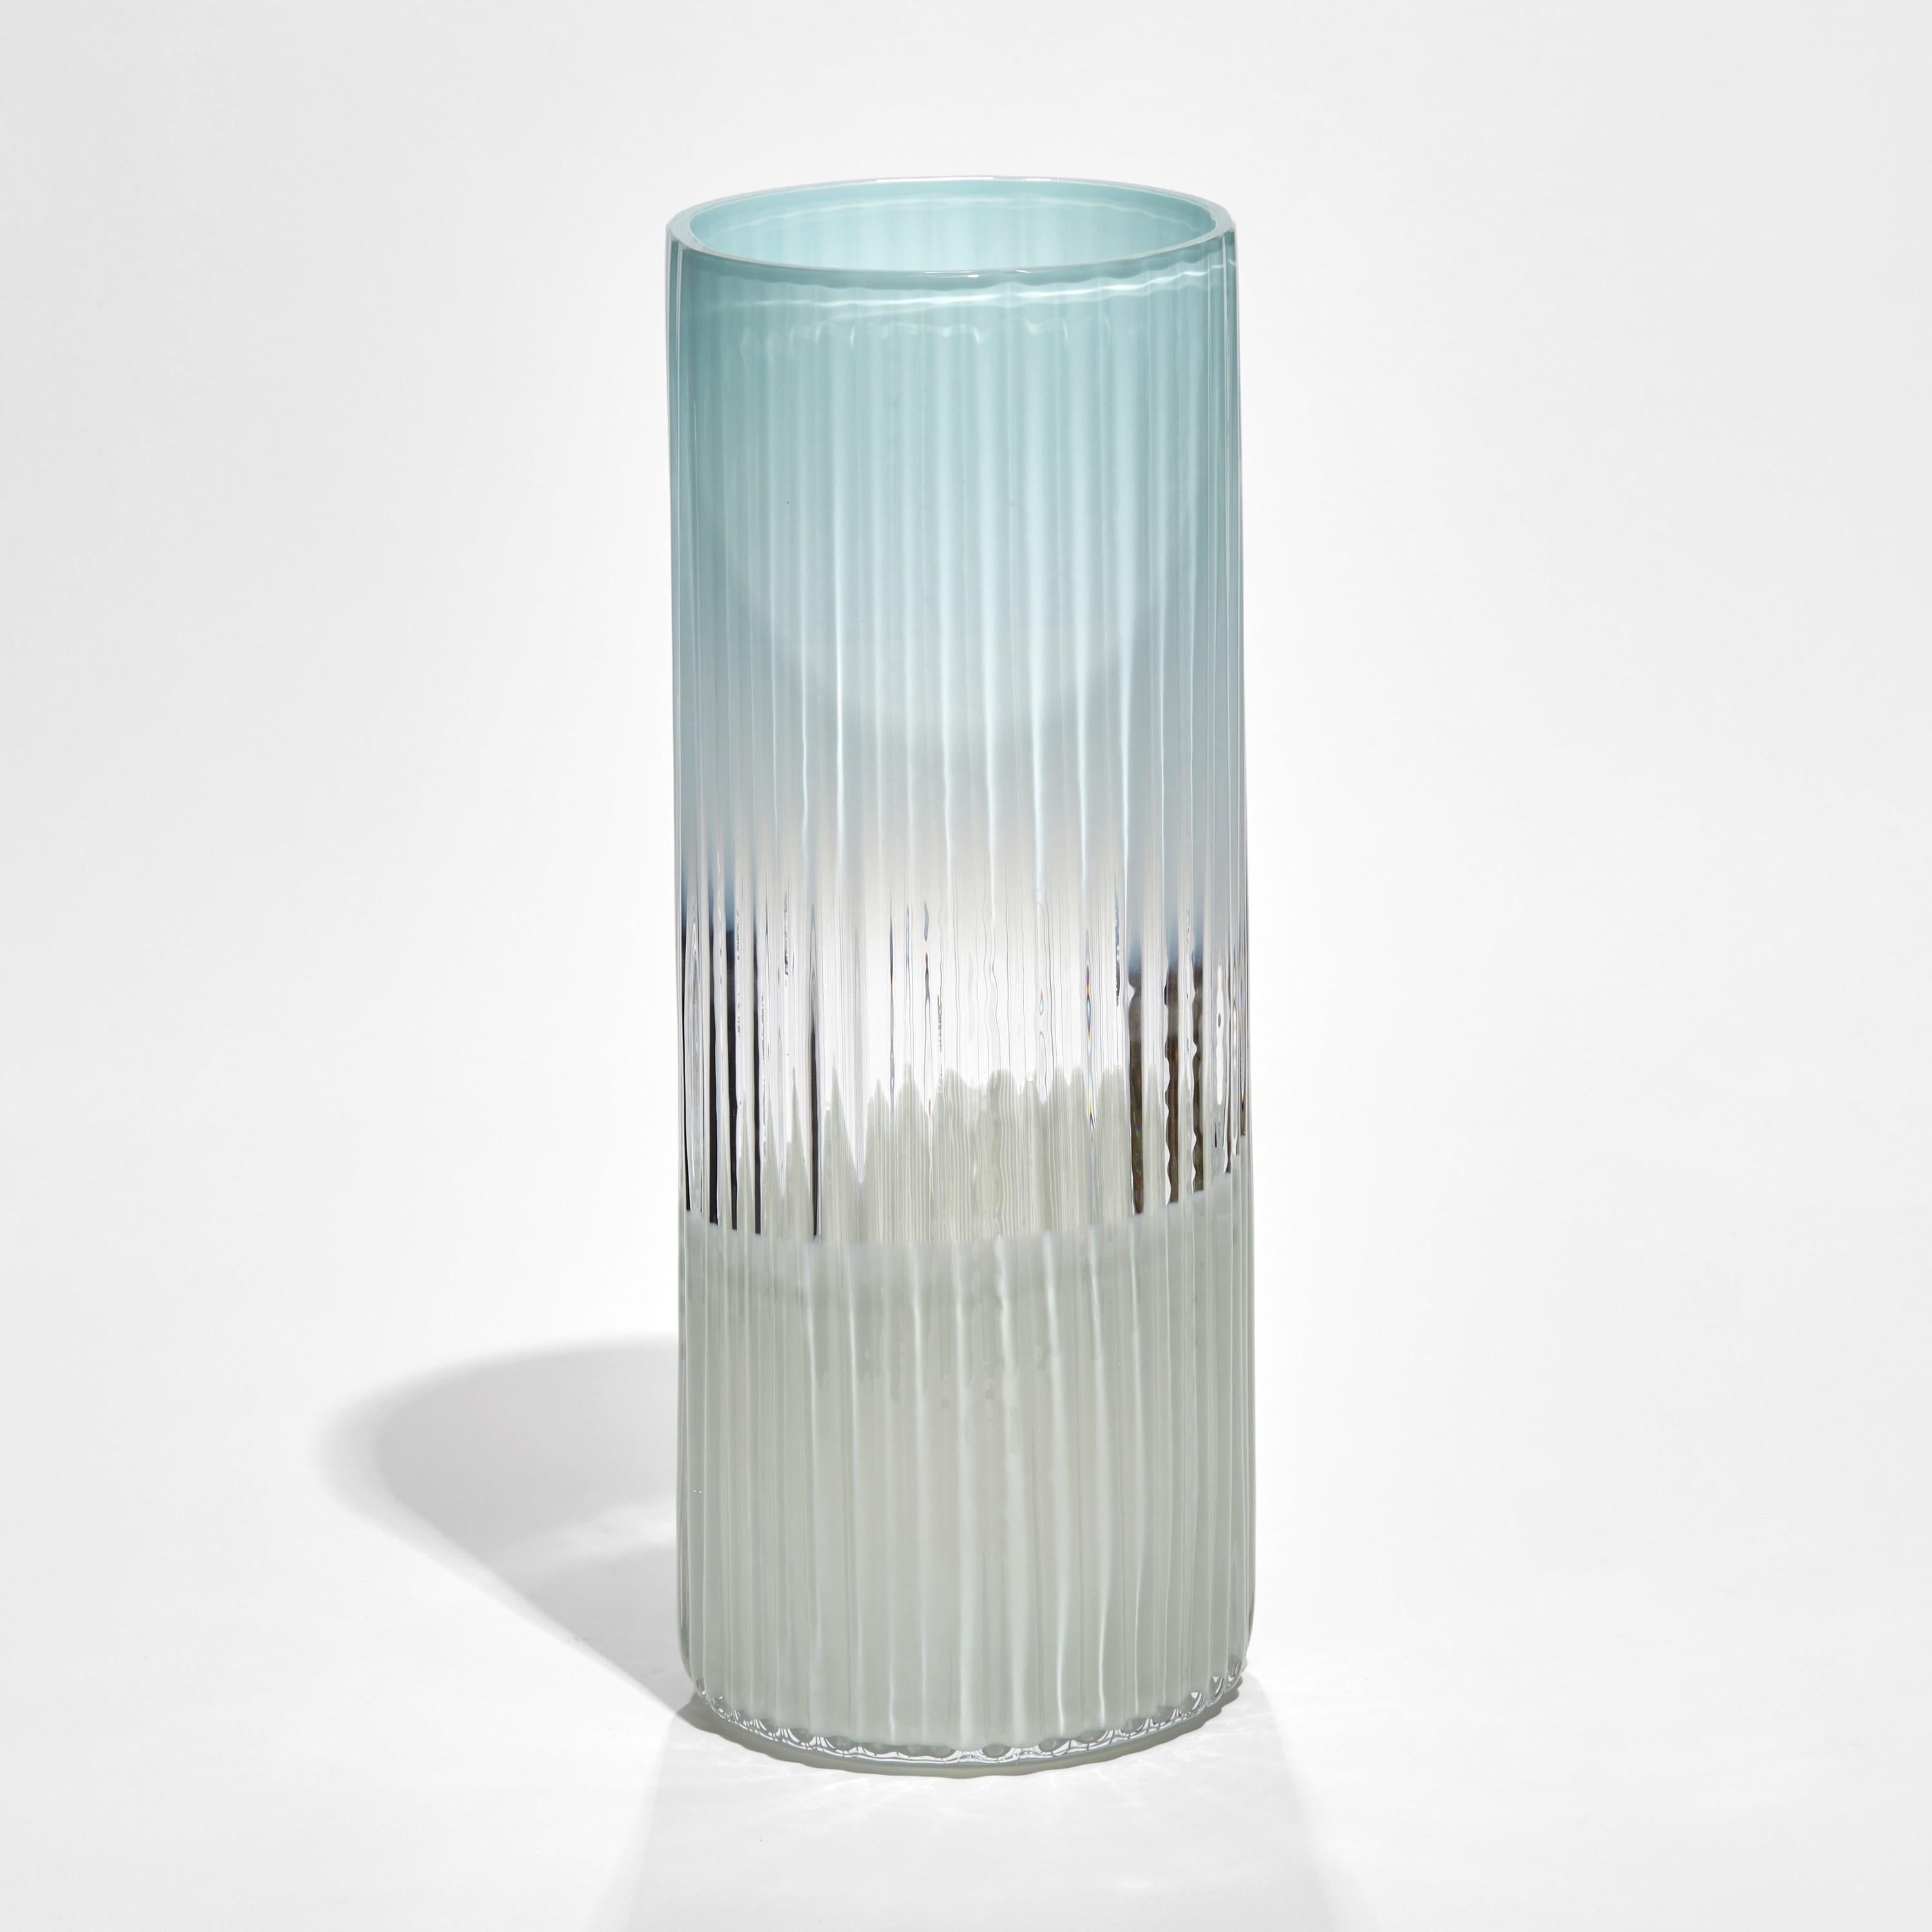 'Plissé vase in Turquoise & Celadon' is a limited edition vase by the Swedish artist and designer, Lena Bergström.

Created for 'Lena 25+', Bergström's 2022 solo exhibition celebrating the 25 years and more for which she has been designing glass